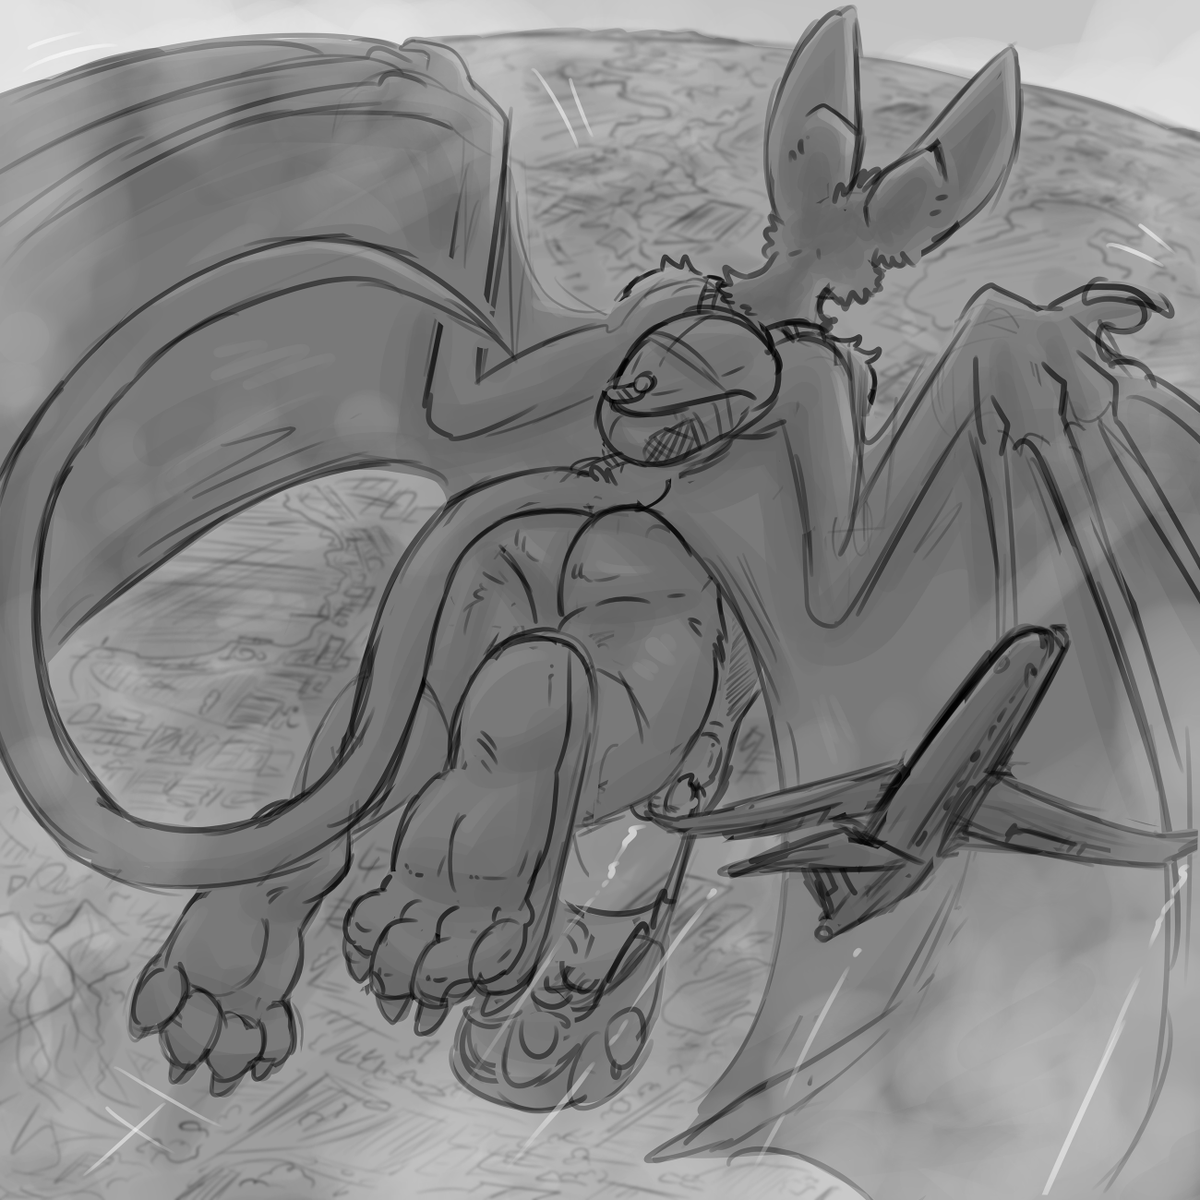 Traveling these days is pretty pricey, so it's a lot cheaper to do it yourself. Even if your wings do get tired... Art by @SixSydes